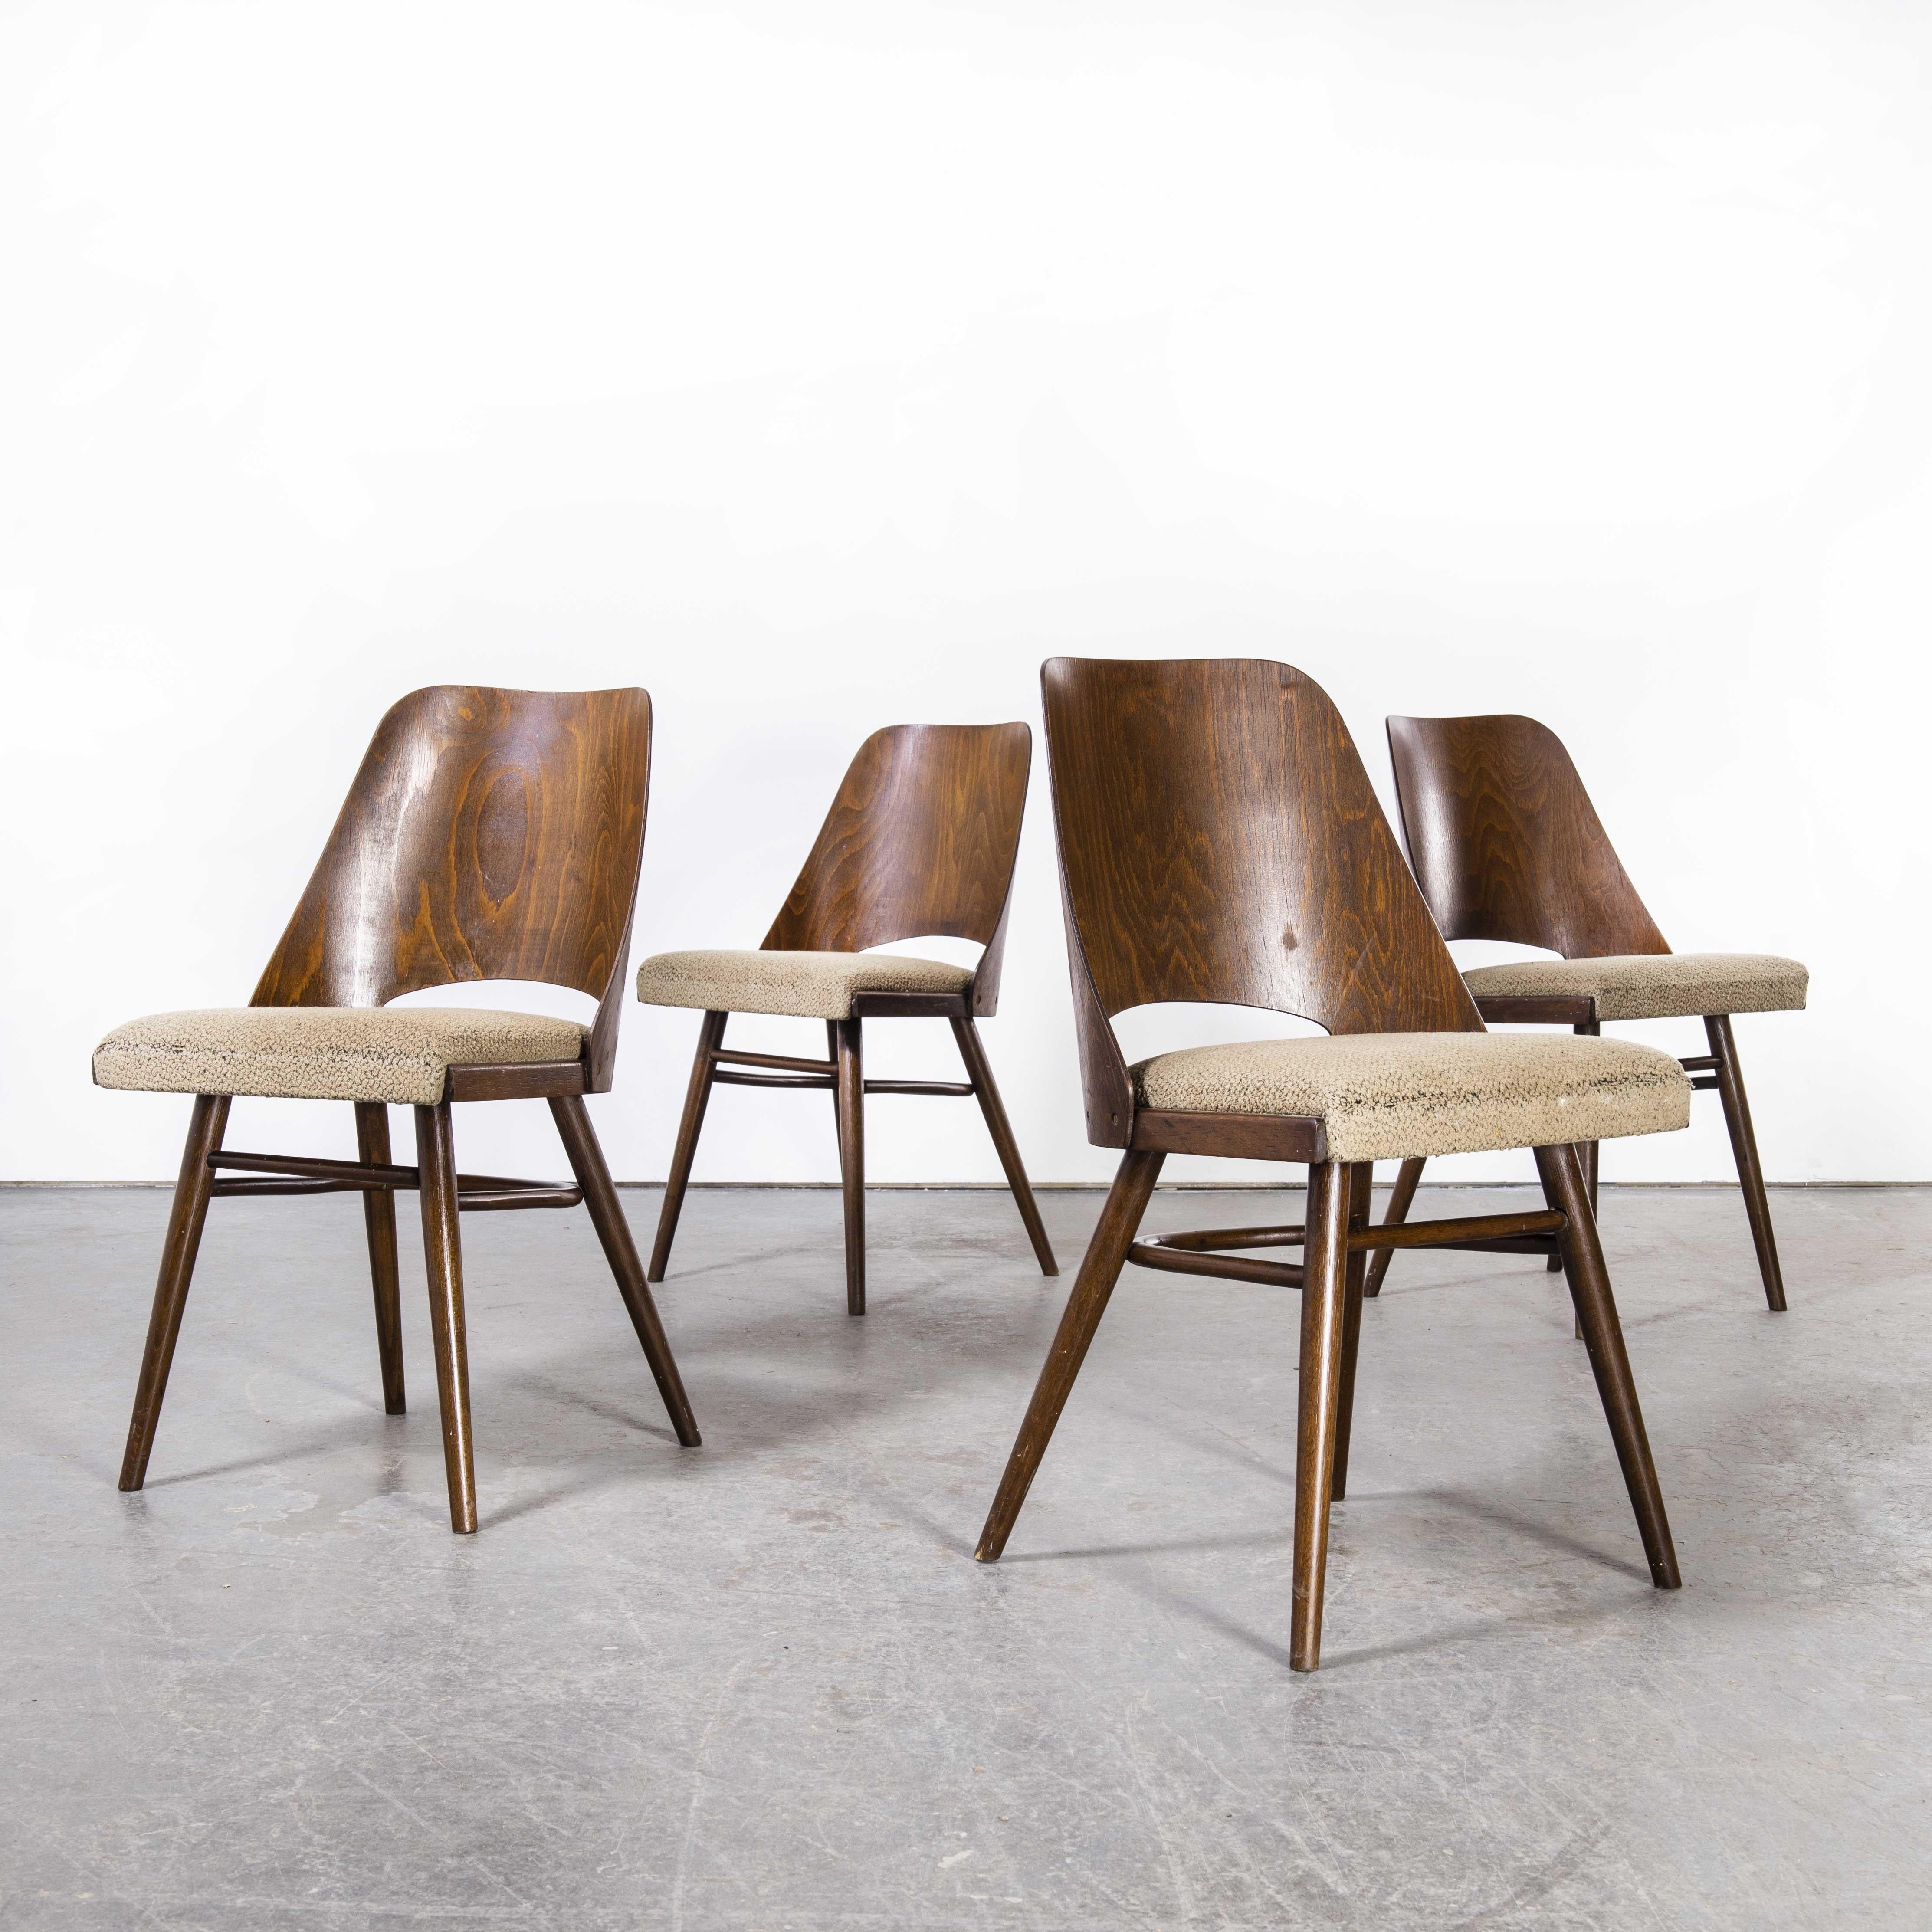 1950’s Upholstered Thon dining chairs by Radomir Hoffman – set of four dark walnut
1950’s Upholstered Thon dining chairs by Radomir Hoffman – set of four. These chairs were produced by the famous Czech firm Ton, still trading today and producing